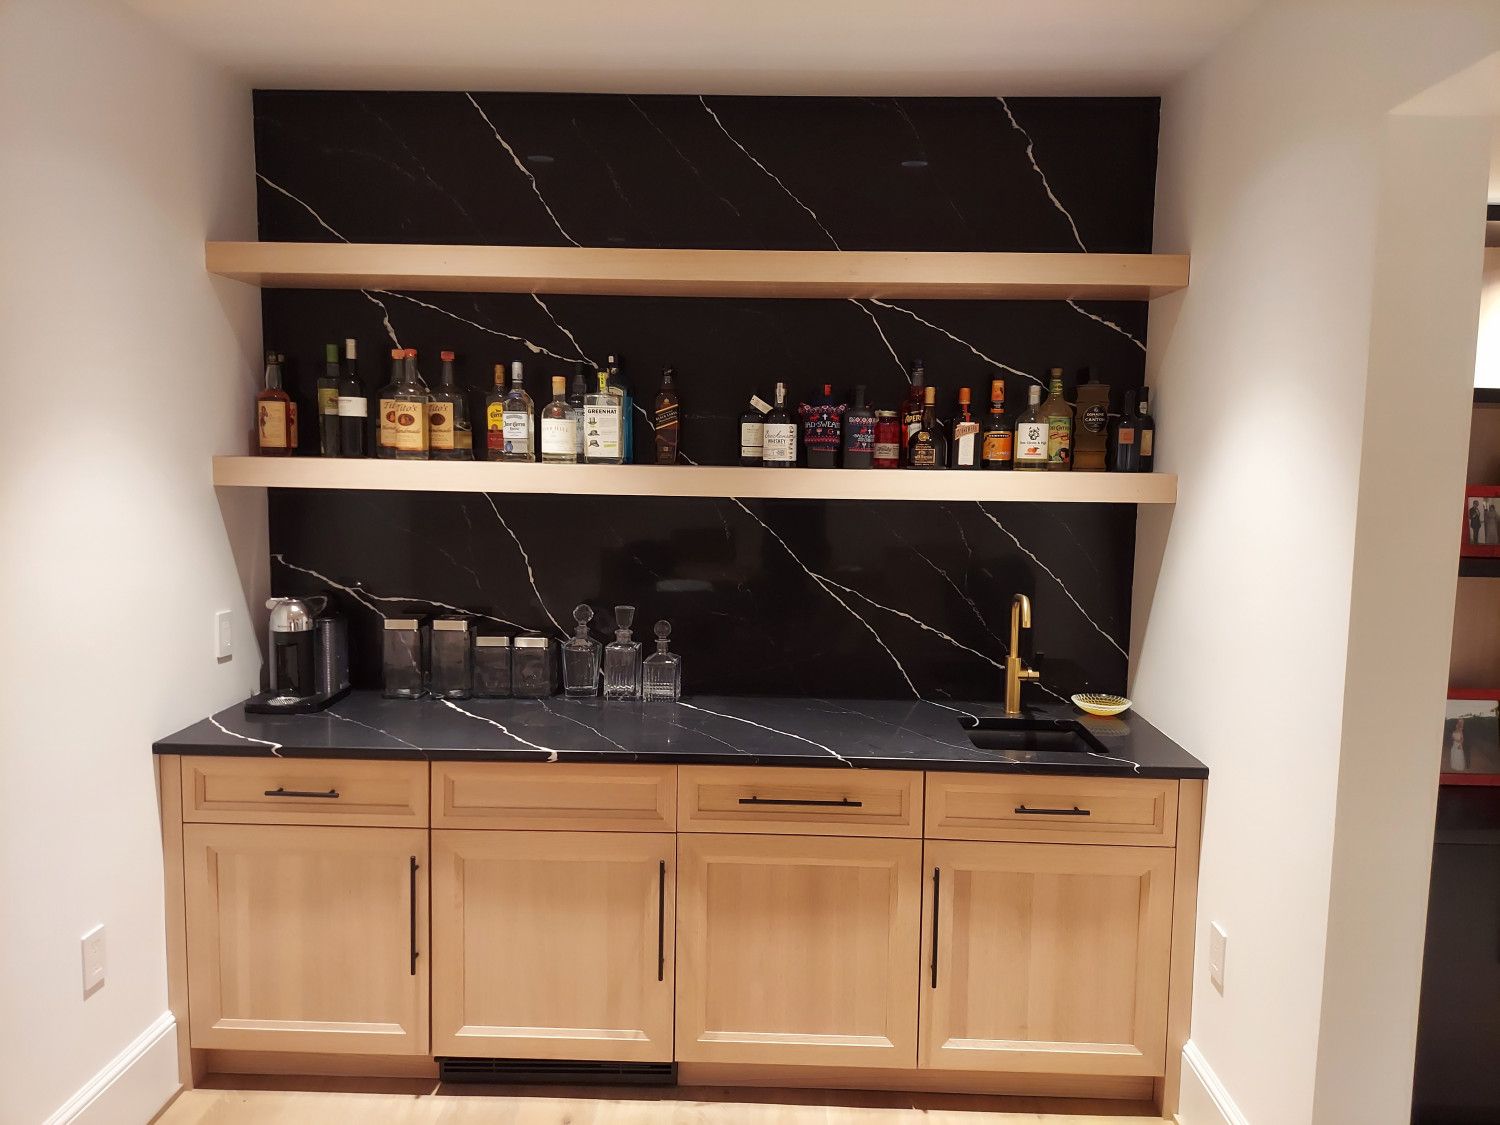 Kitchen Remodeling Services in Bethesda, Chevy Chase, Rockville MD and surrounding areas